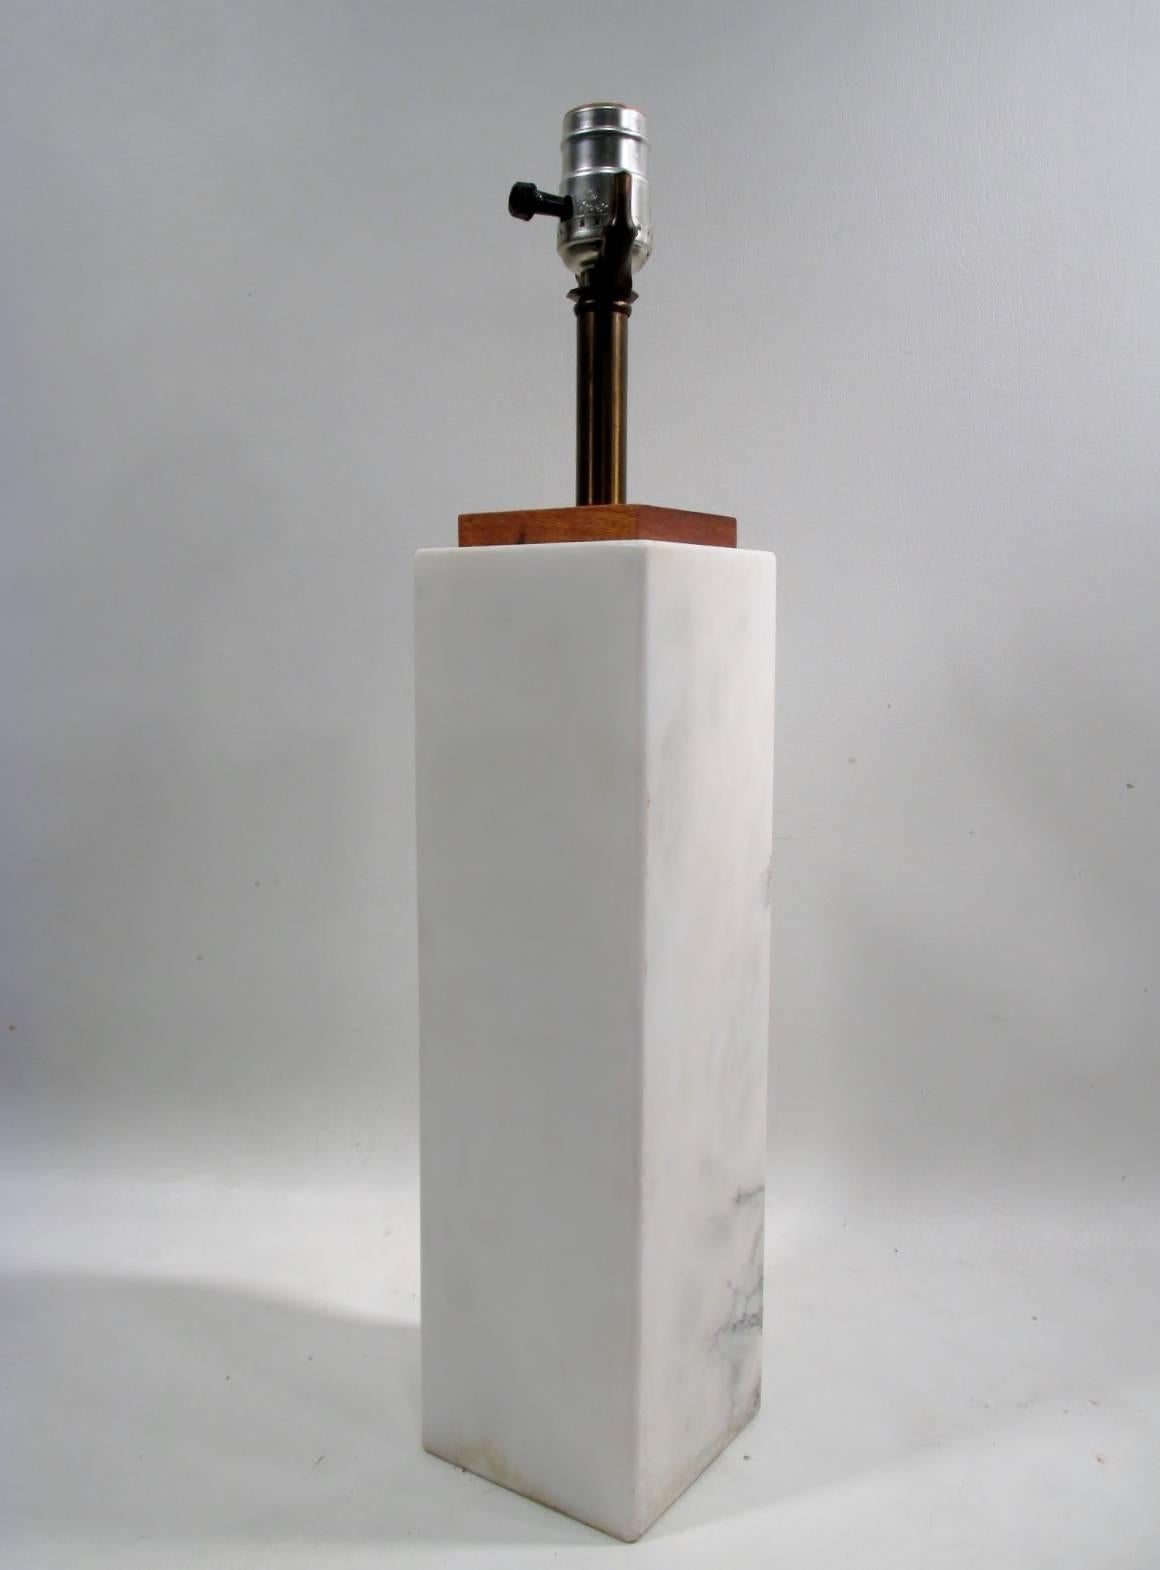 Iconic early 1950s white travertine marble table lamp designed by T.H. Robsjohn-Gibbings. Manufactured by George Hanson lighting in various materials, this example with oak and brass fittings. It is renowned that this lamp design was favoured by